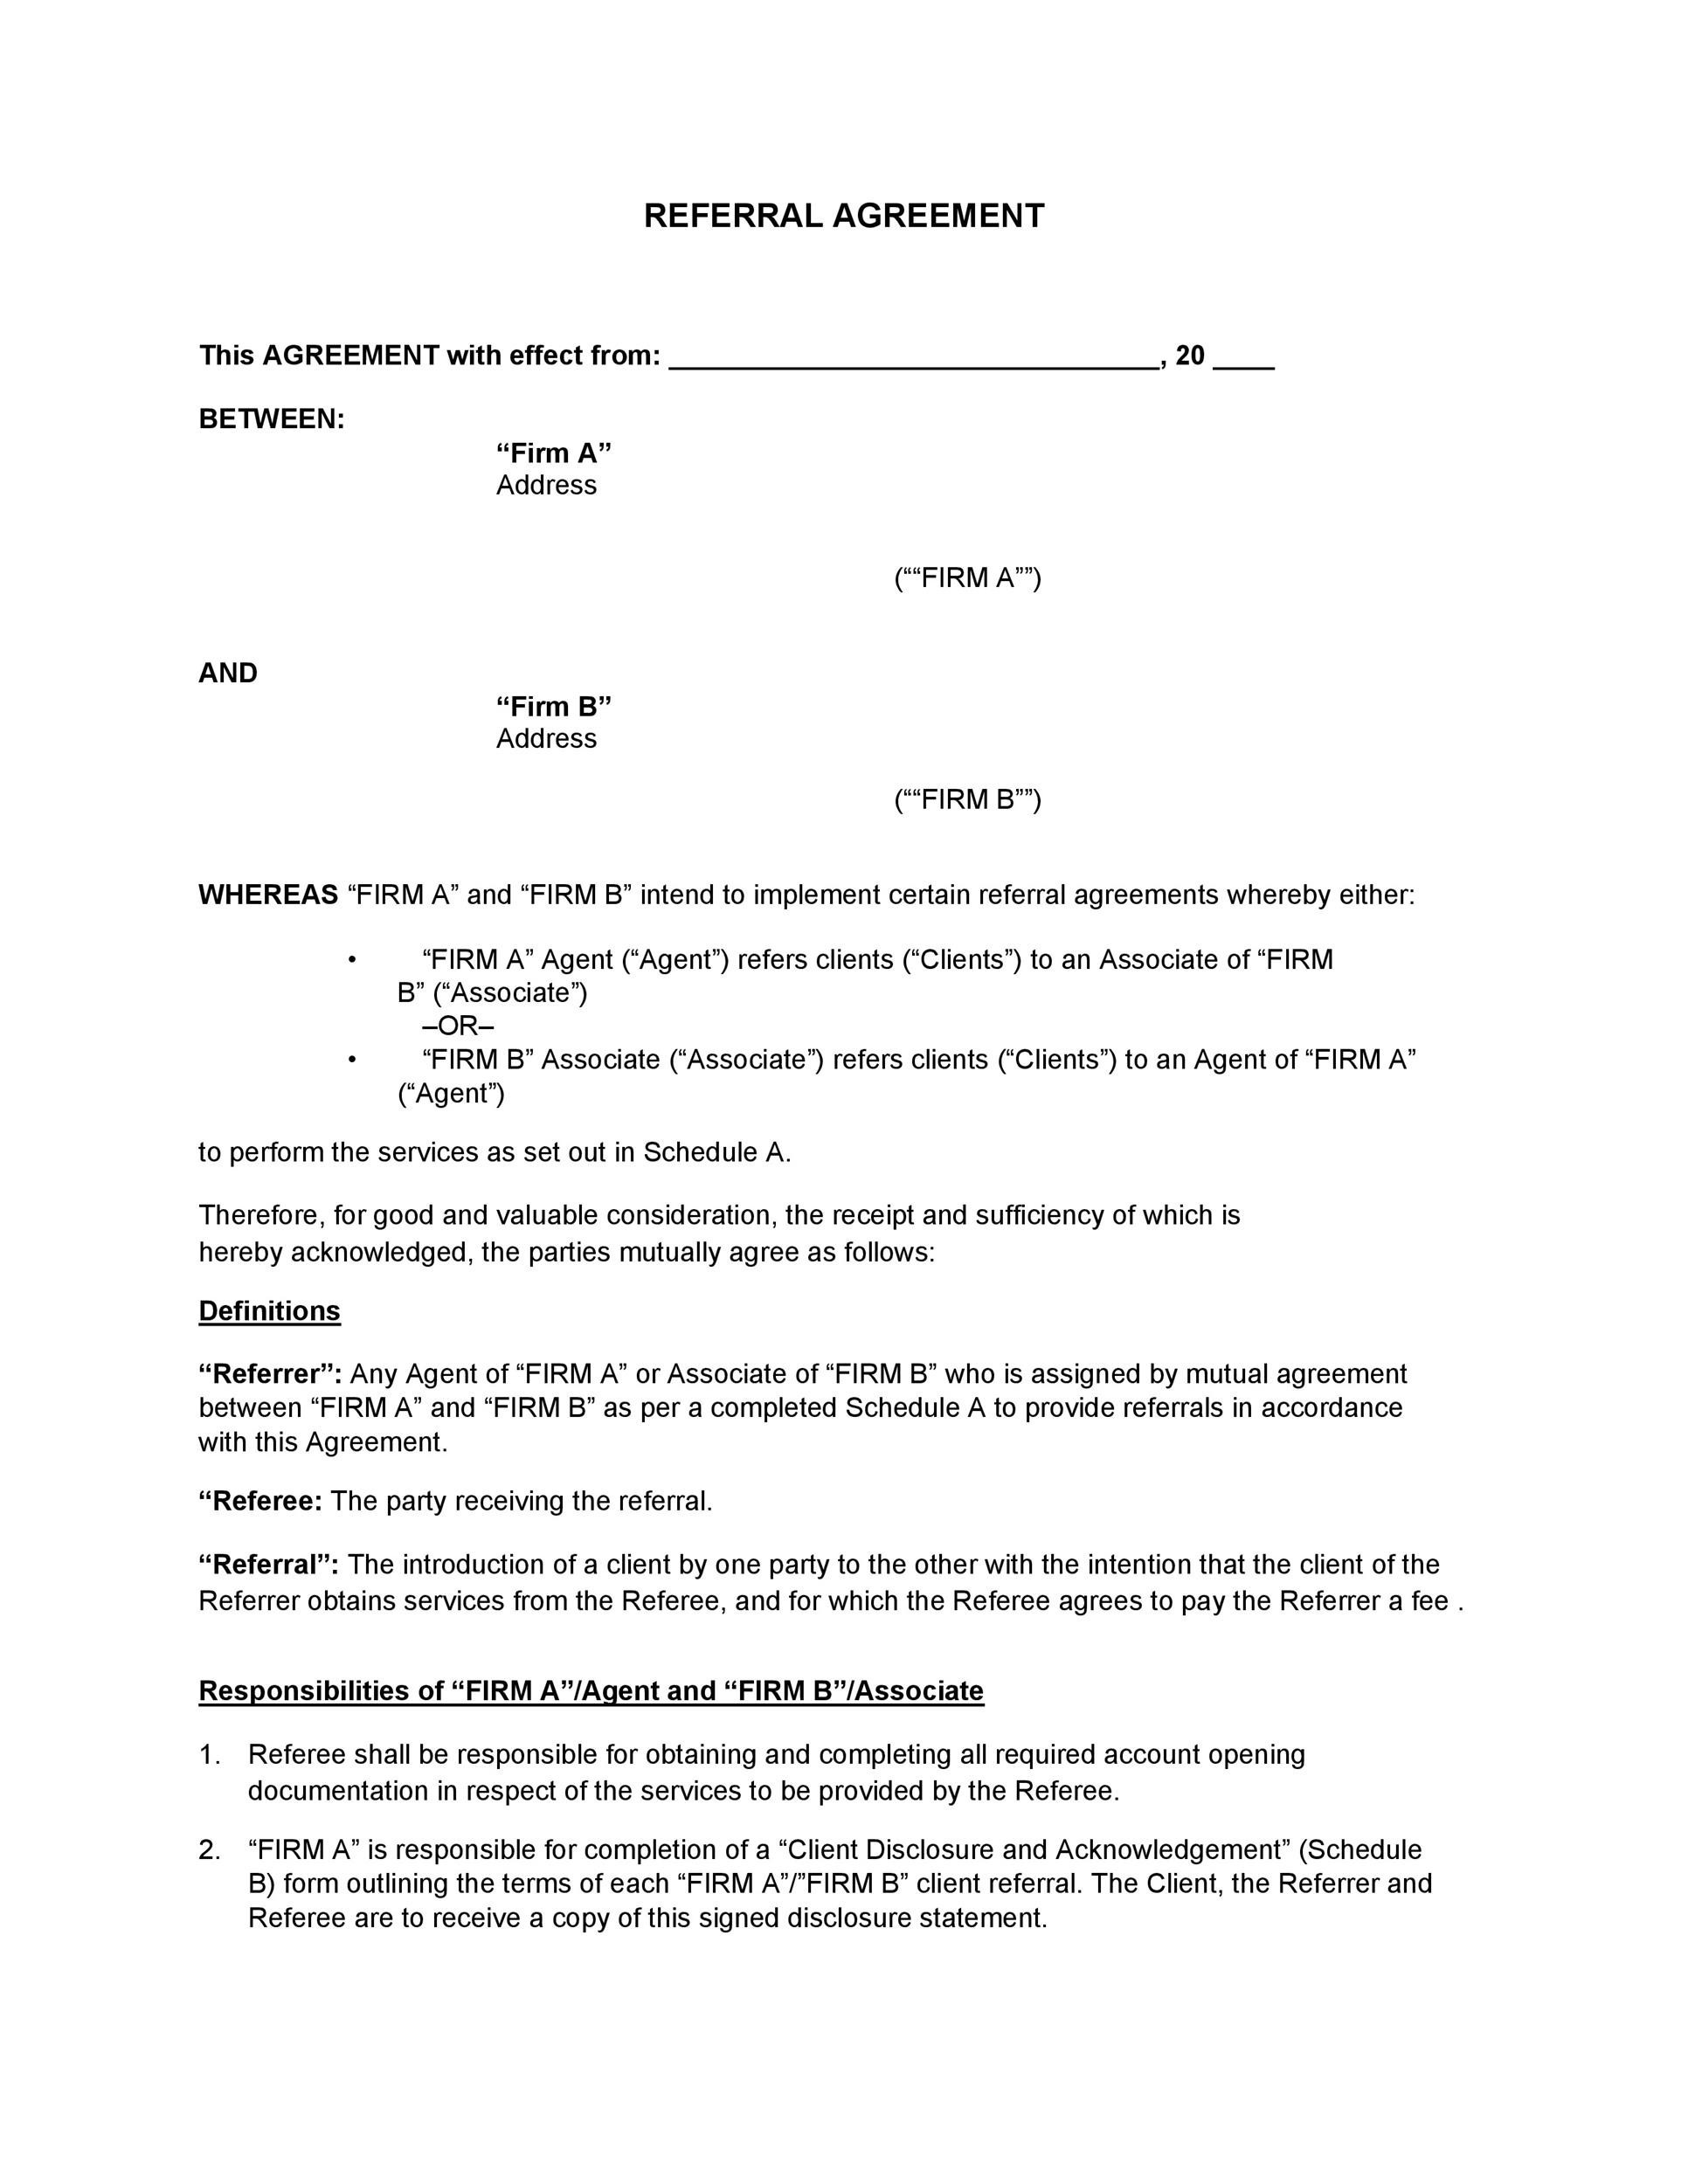 Free referral agreement template 04